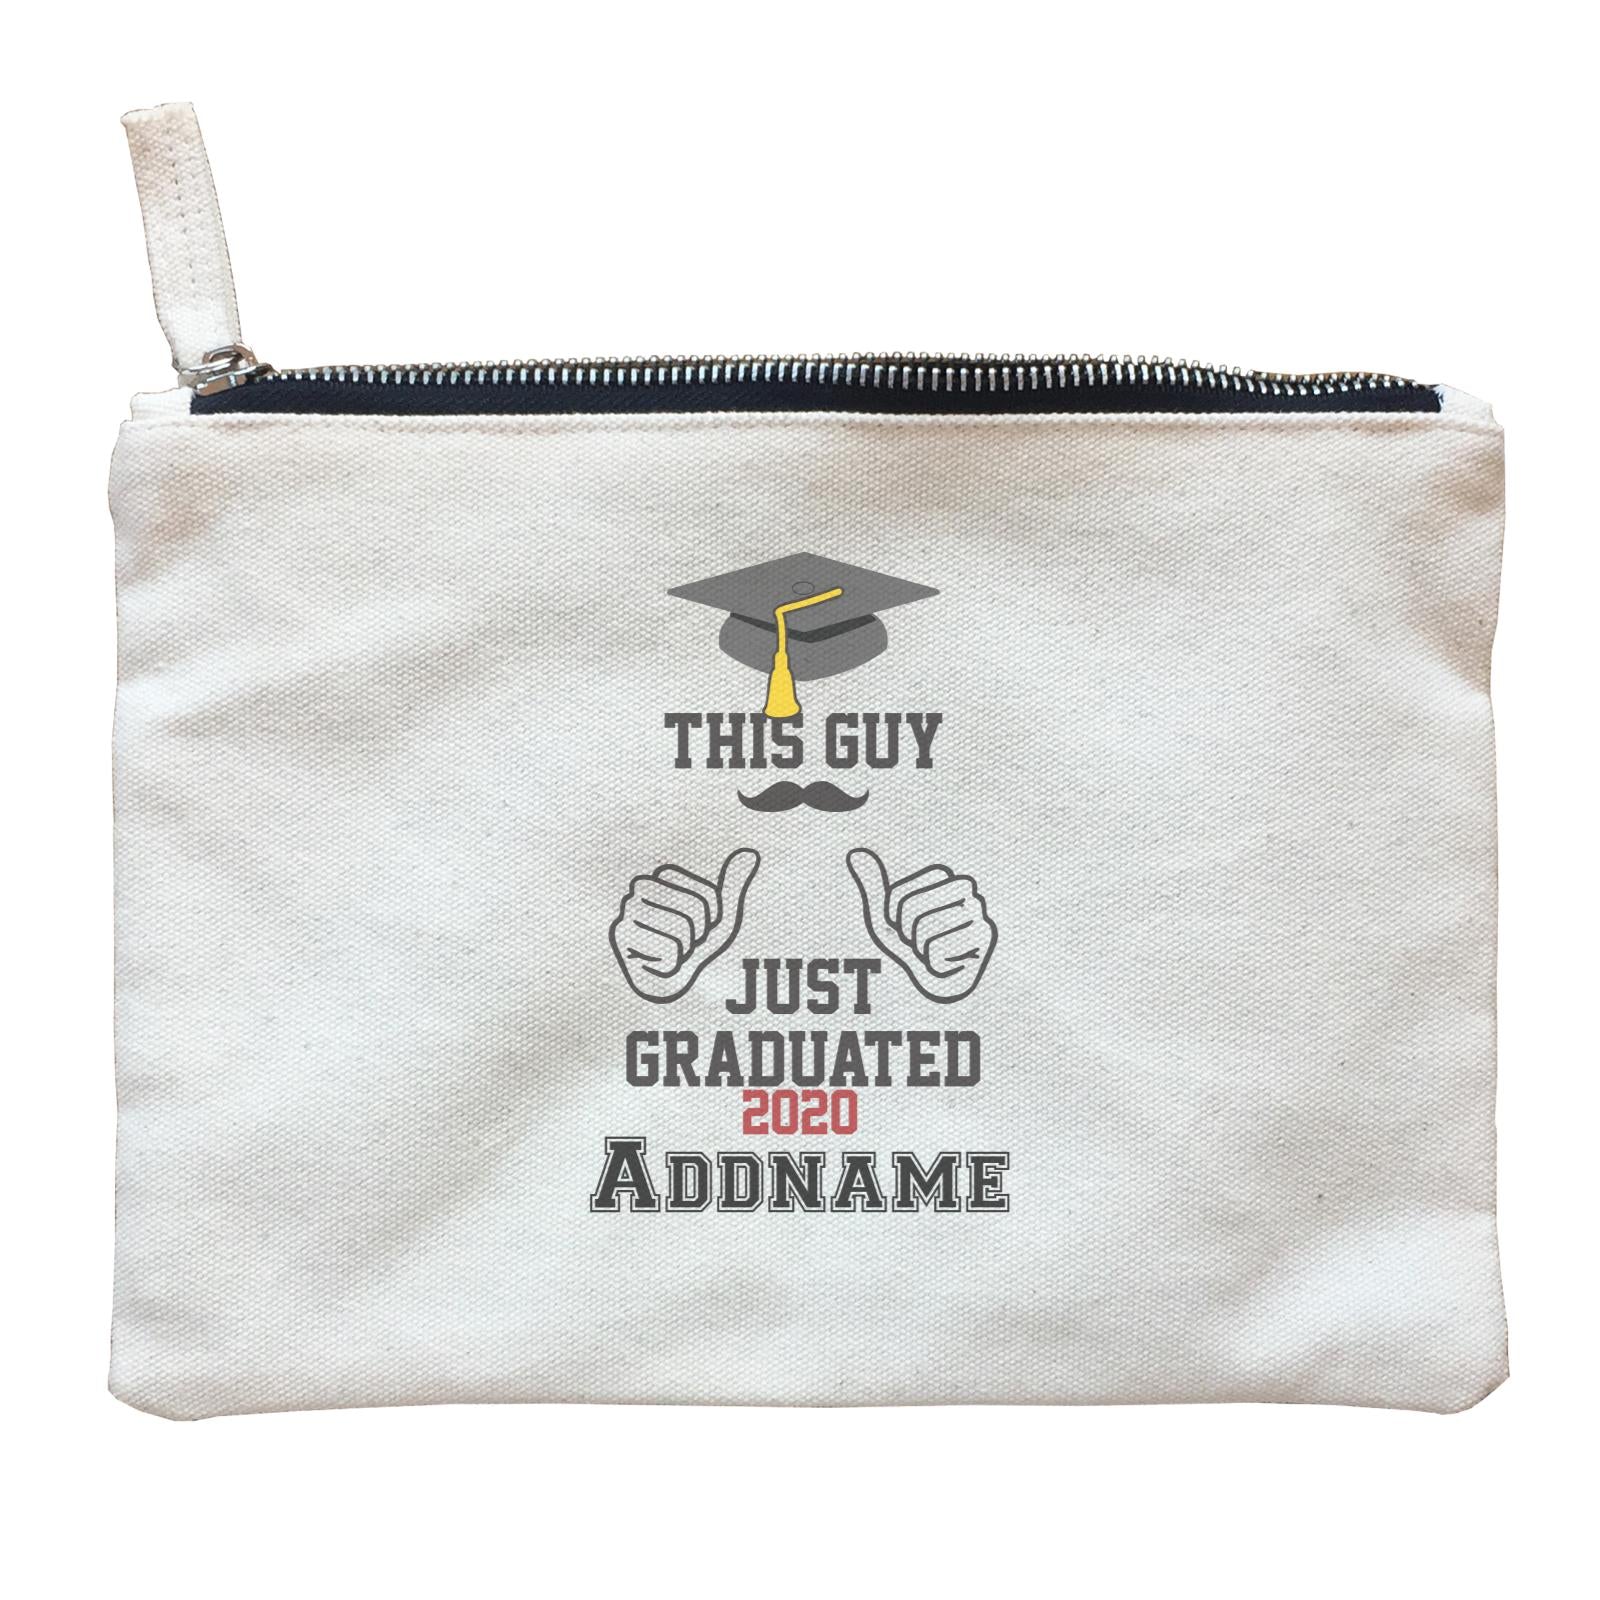 Graduation Series This Guy Just Graduated Zipper Pouch